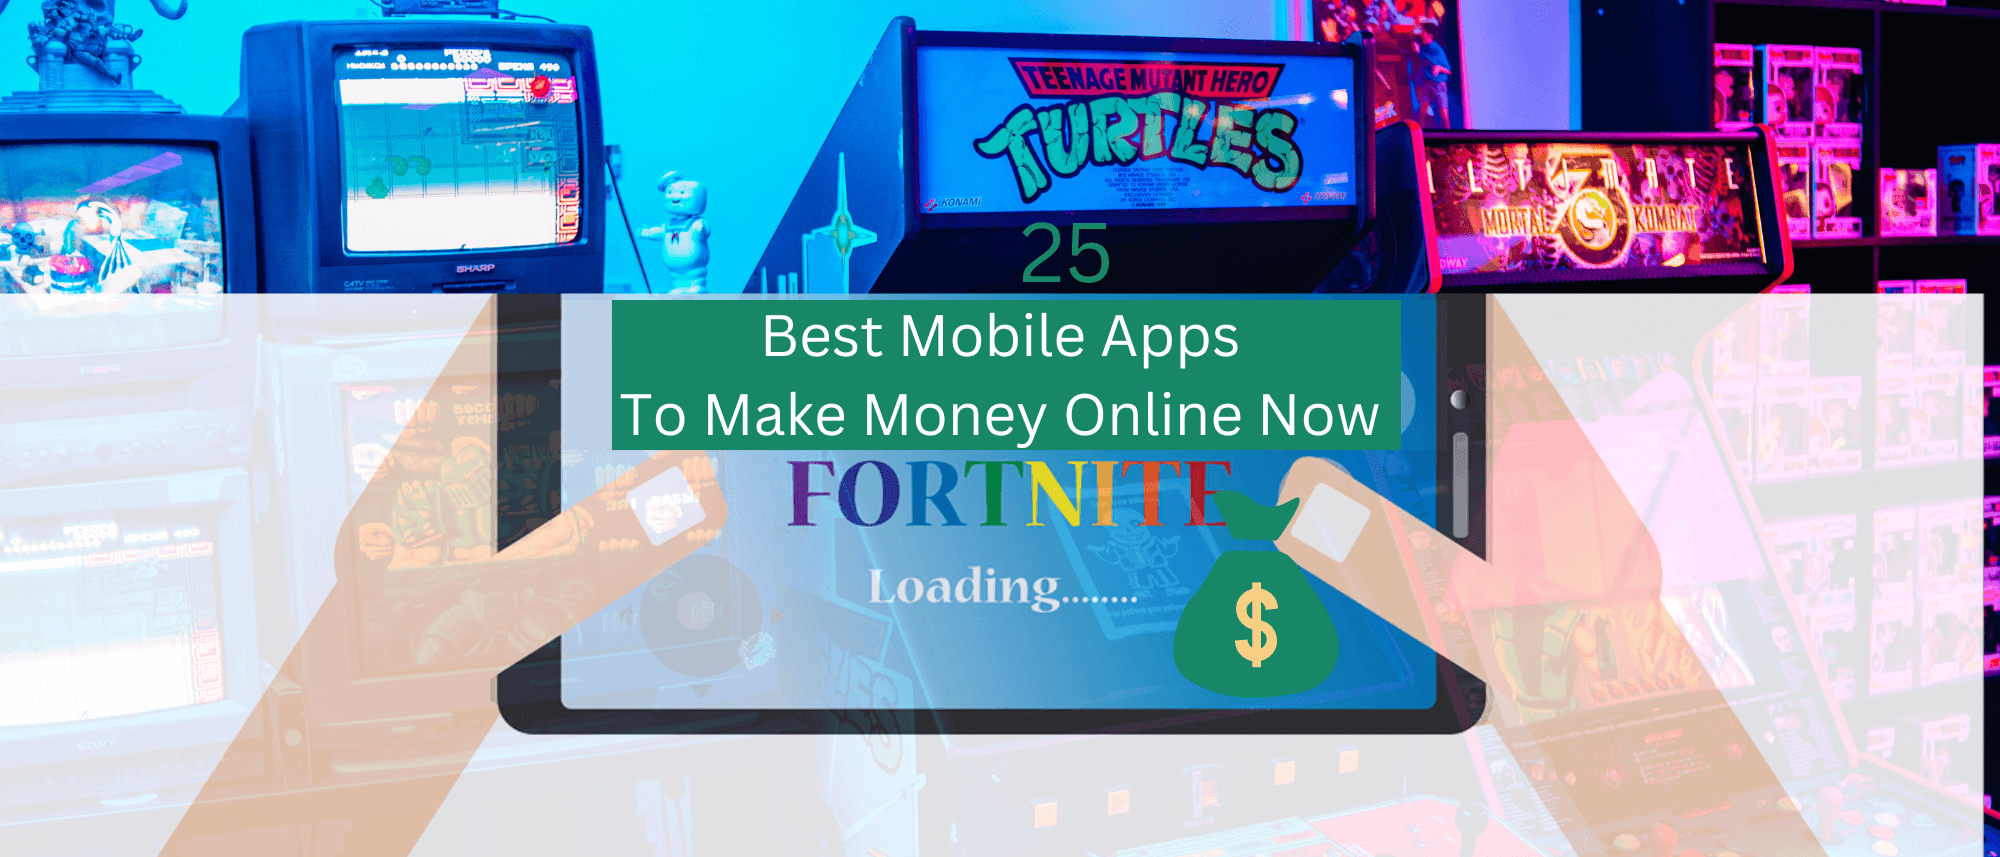 25 Best Mobile Apps To Make Money Online Now